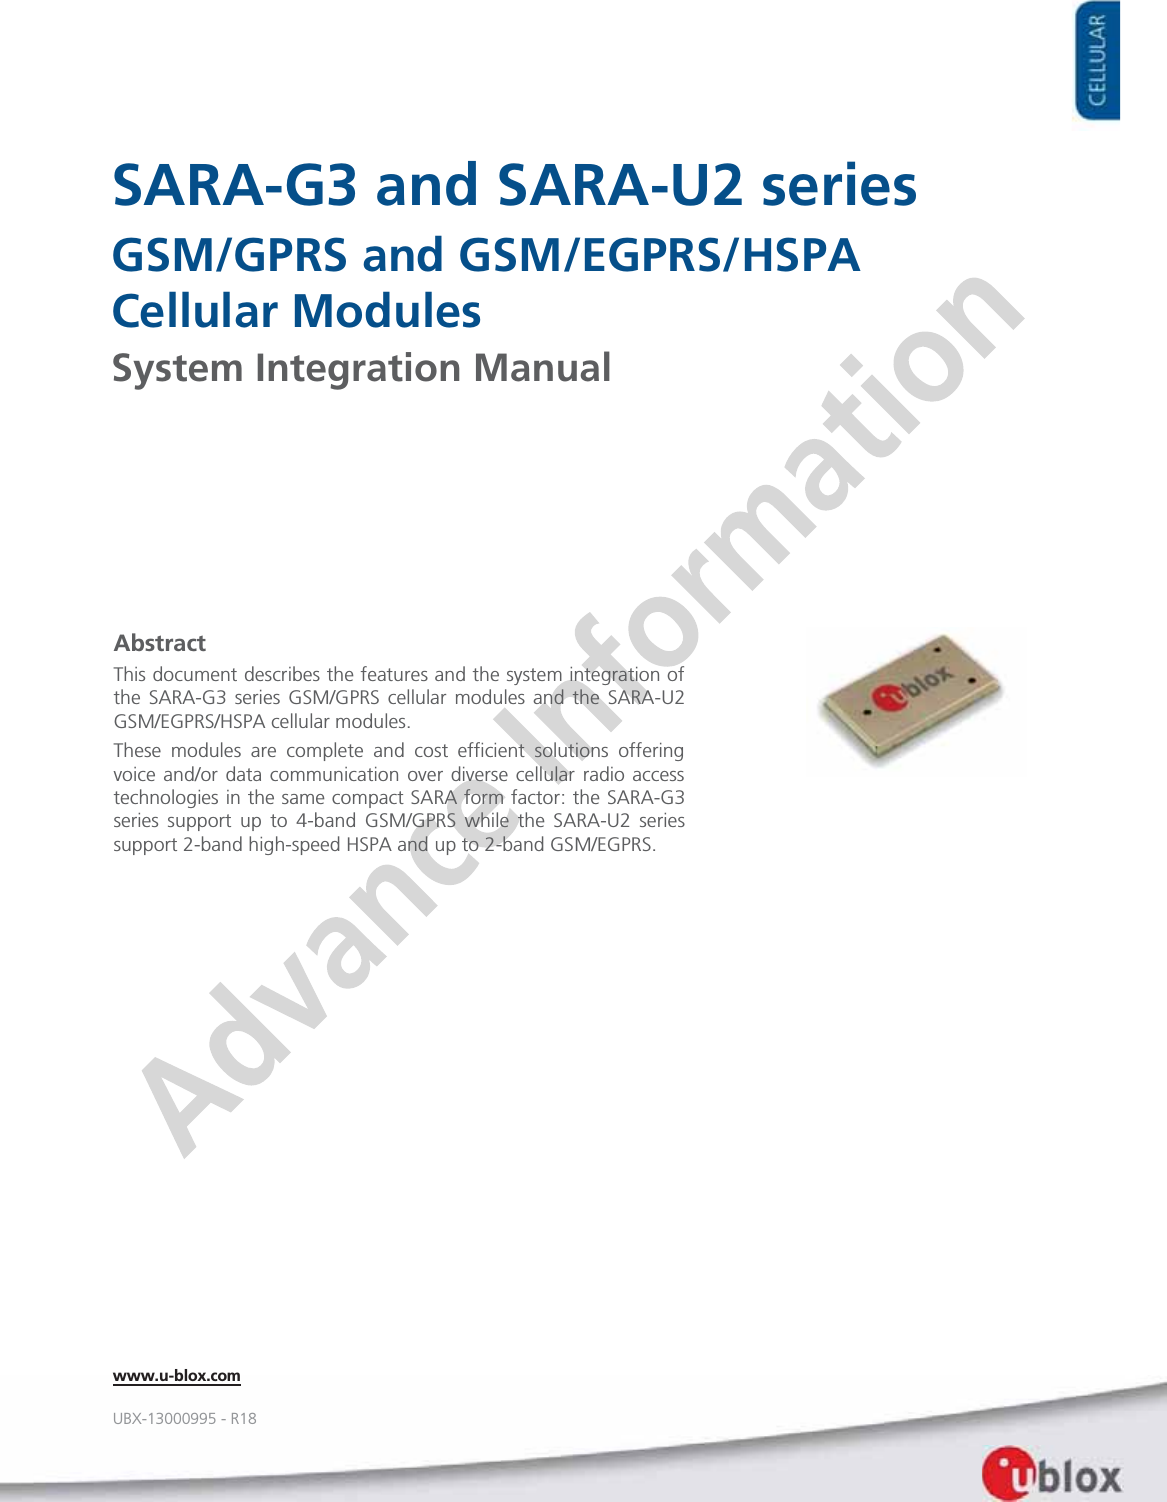     SARA-G3 and SARA-U2 series GSM/GPRS and GSM/EGPRS/HSPA Cellular Modules System Integration Manual                   Abstract This document describes the features and the system integration of the SARA-G3 series GSM/GPRS cellular modules and the SARA-U2 GSM/EGPRS/HSPA cellular modules. These modules are complete and cost efficient solutions offering voice and/or data communication over diverse cellular radio access technologies in the same compact SARA form factor: the SARA-G3 series support up to 4-band GSM/GPRS while the SARA-U2 series support 2-band high-speed HSPA and up to 2-band GSM/EGPRS.  www.u-blox.com UBX-13000995 - R18 